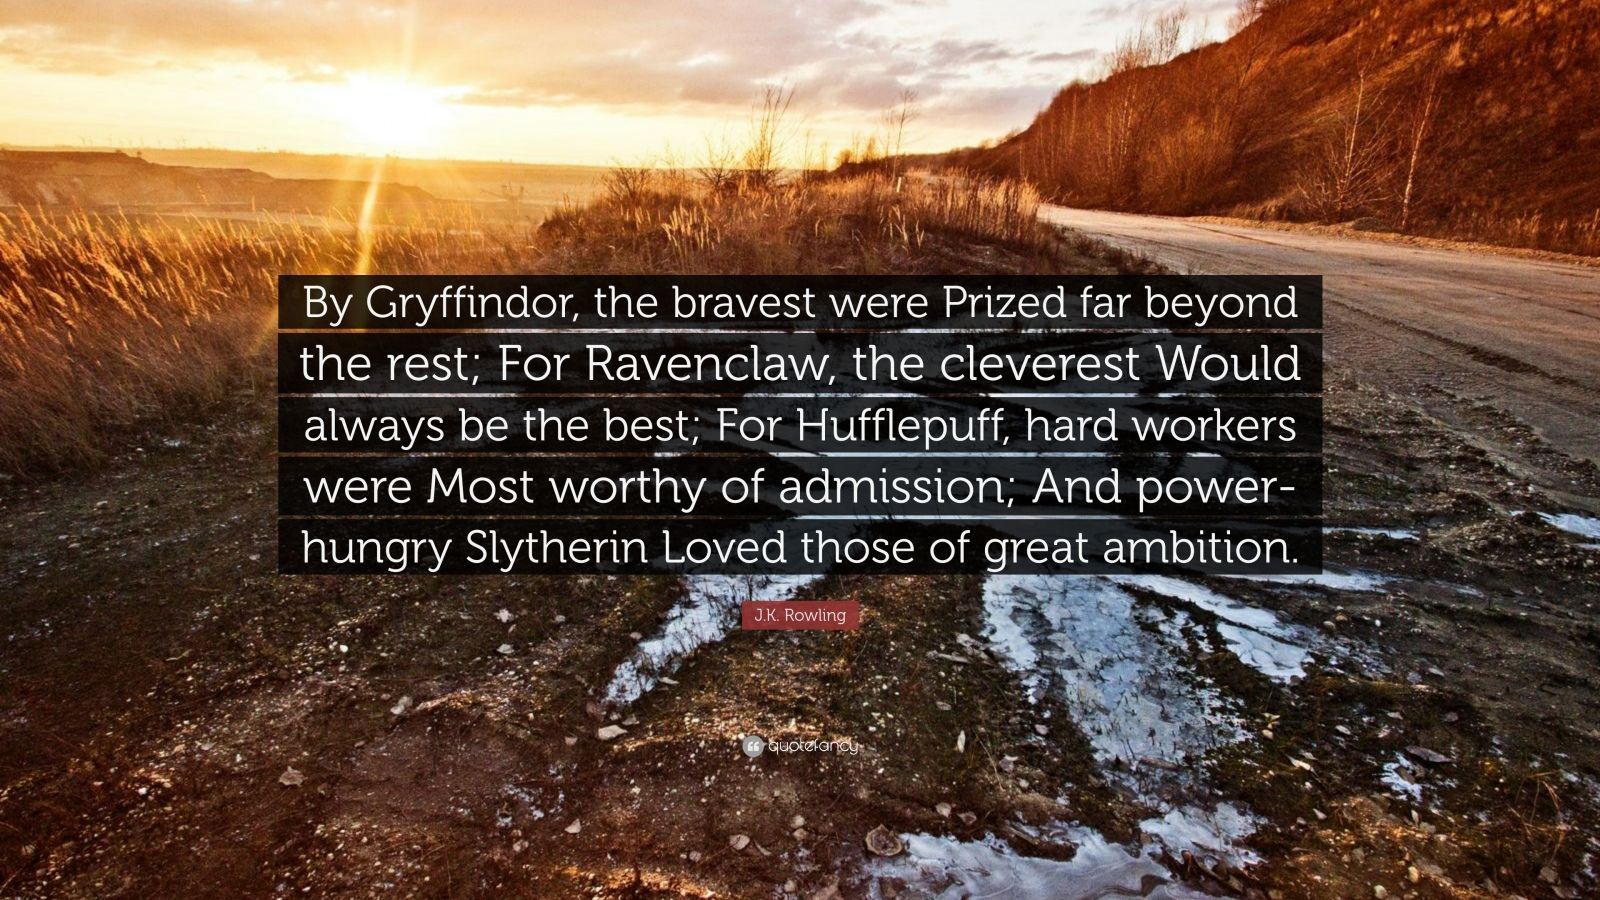 J.K. Rowling Quote: “By Gryffindor, the bravest were Prized far